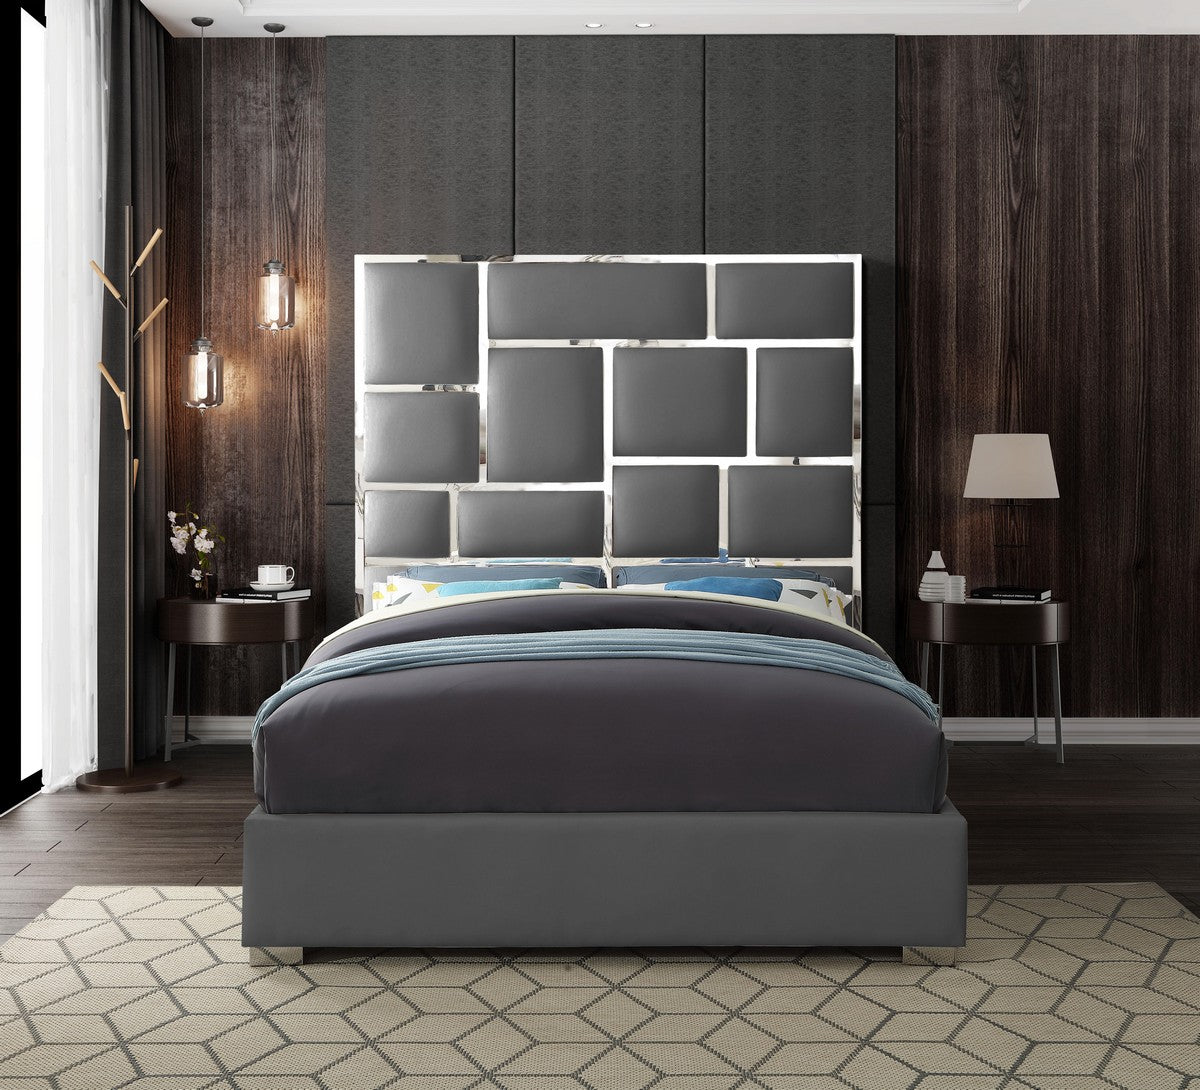 Meridian Furniture Milan Grey Faux Leather Queen Bed